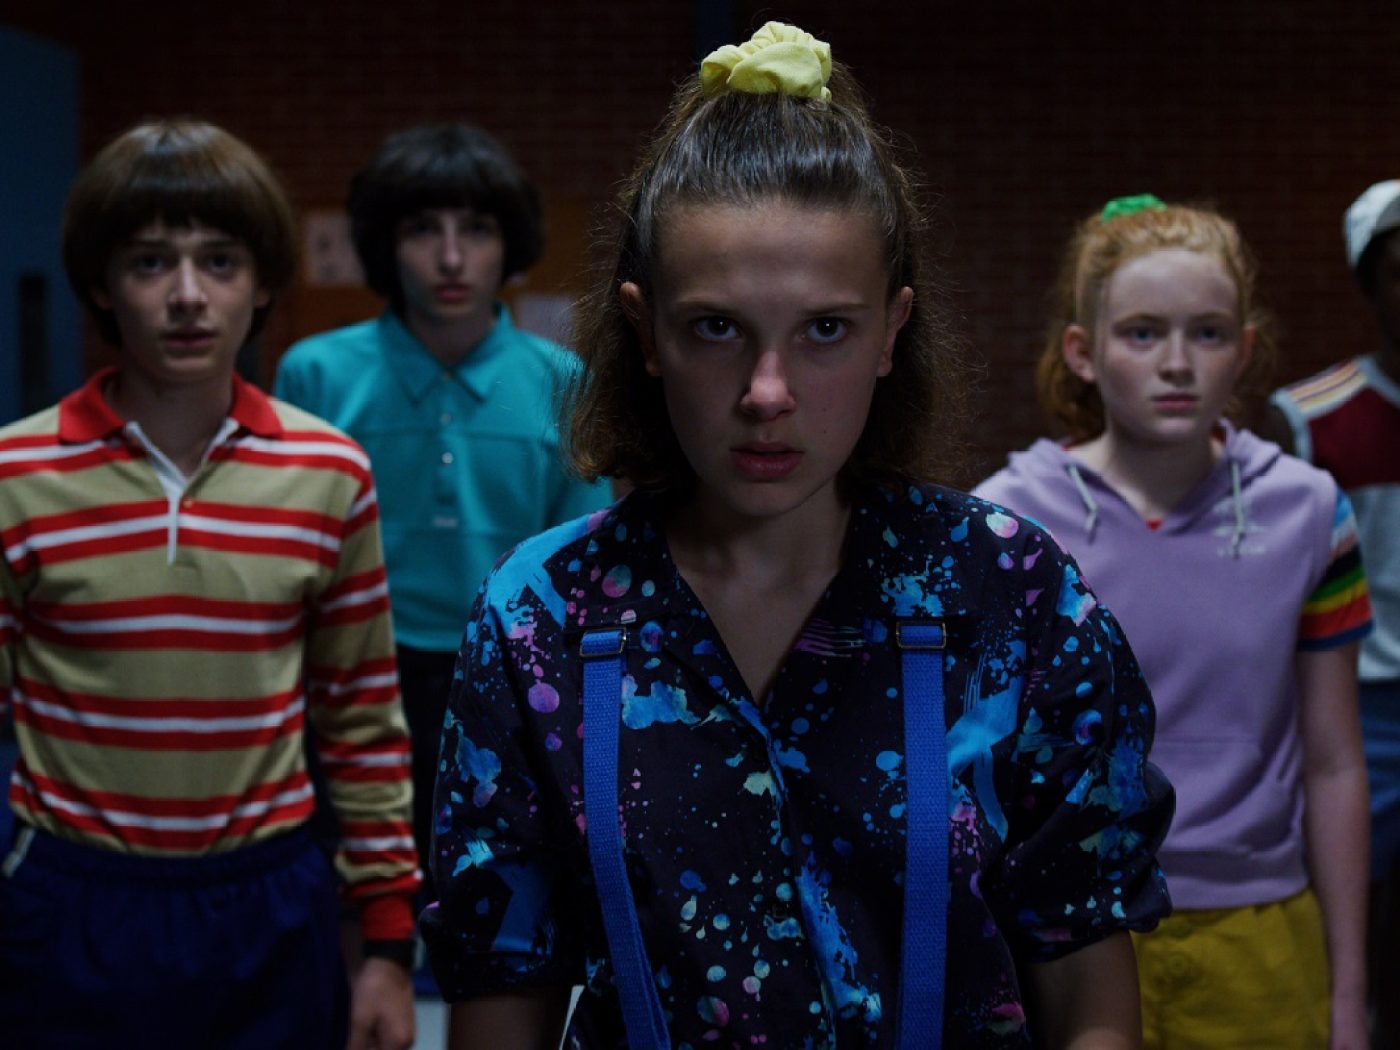 All the upcoming Stranger Things spin-offs